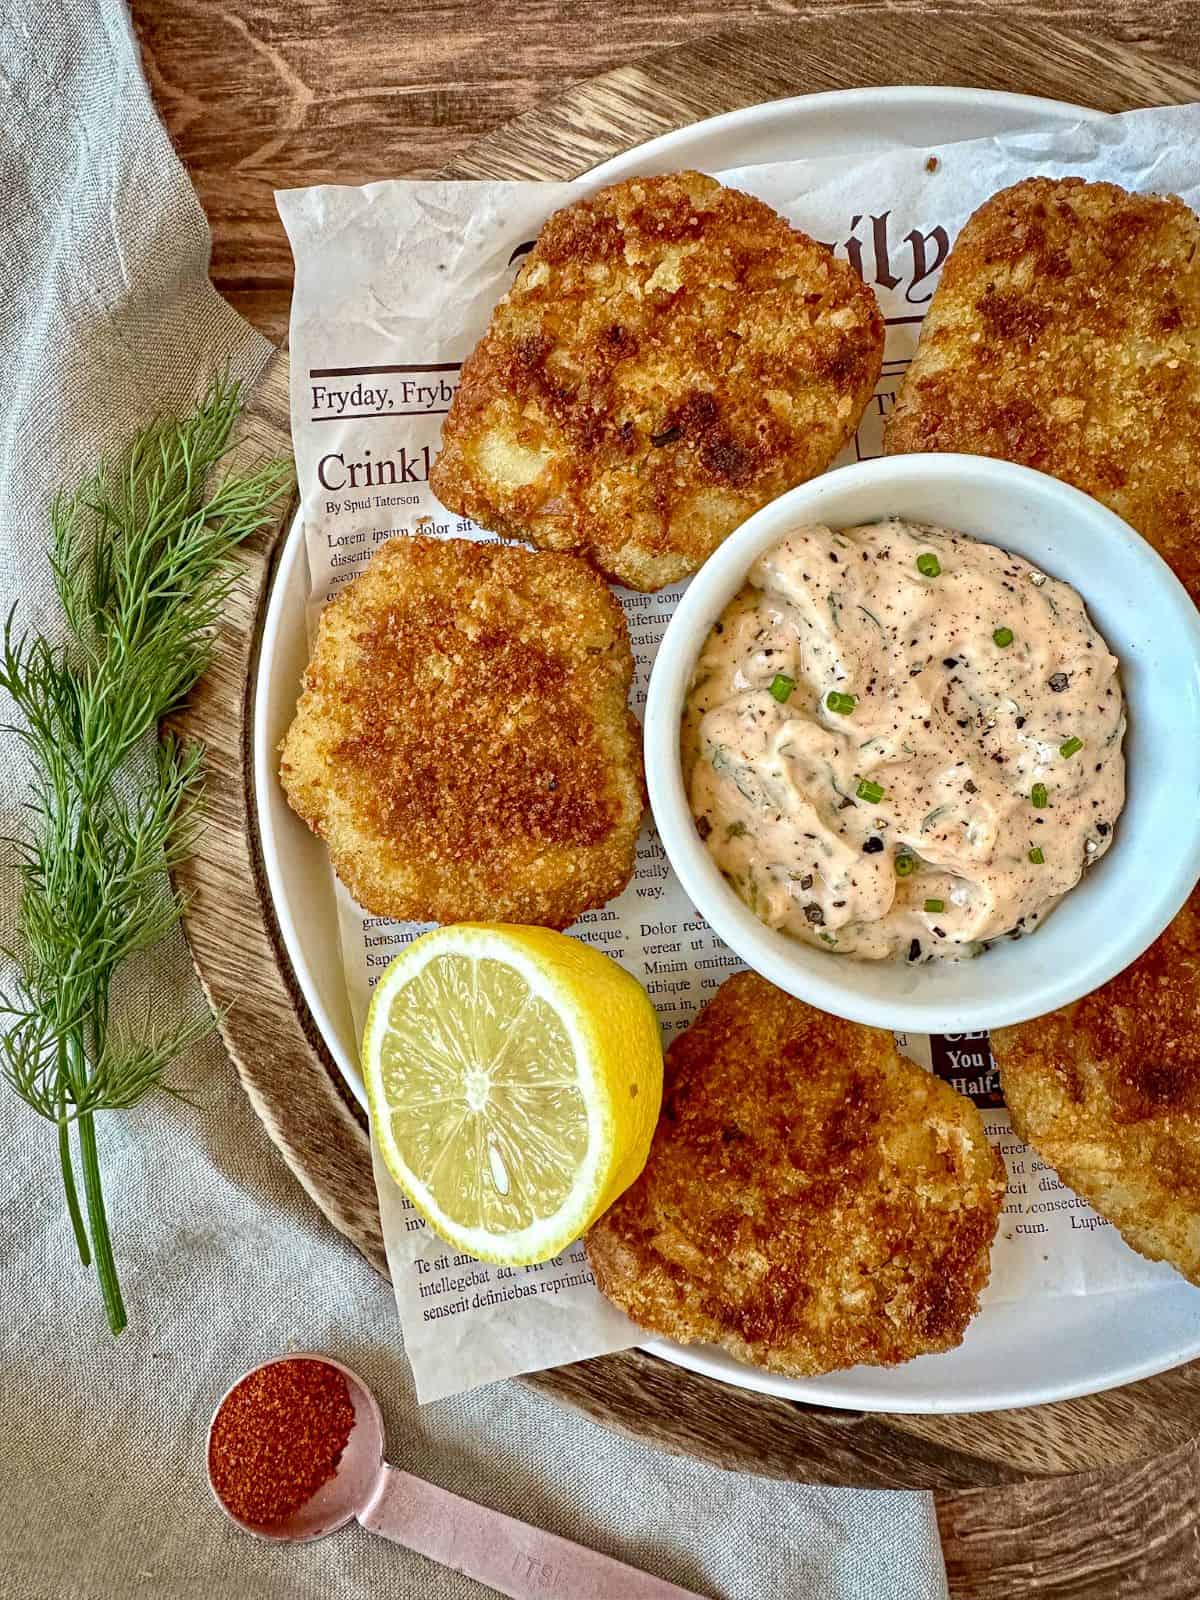 Creamy and spicy tartar sauce in a dipping bowl on a plate with fish. A spoon of Cajun seasoning and fresh dill are next to the plate.